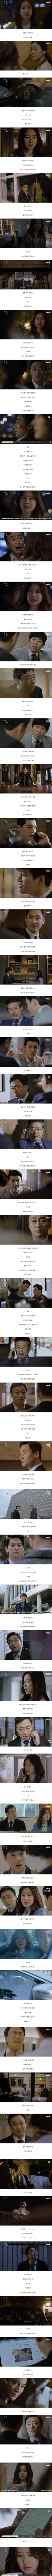 episodes 5 and 6 captures for the Korean drama 'Memory'